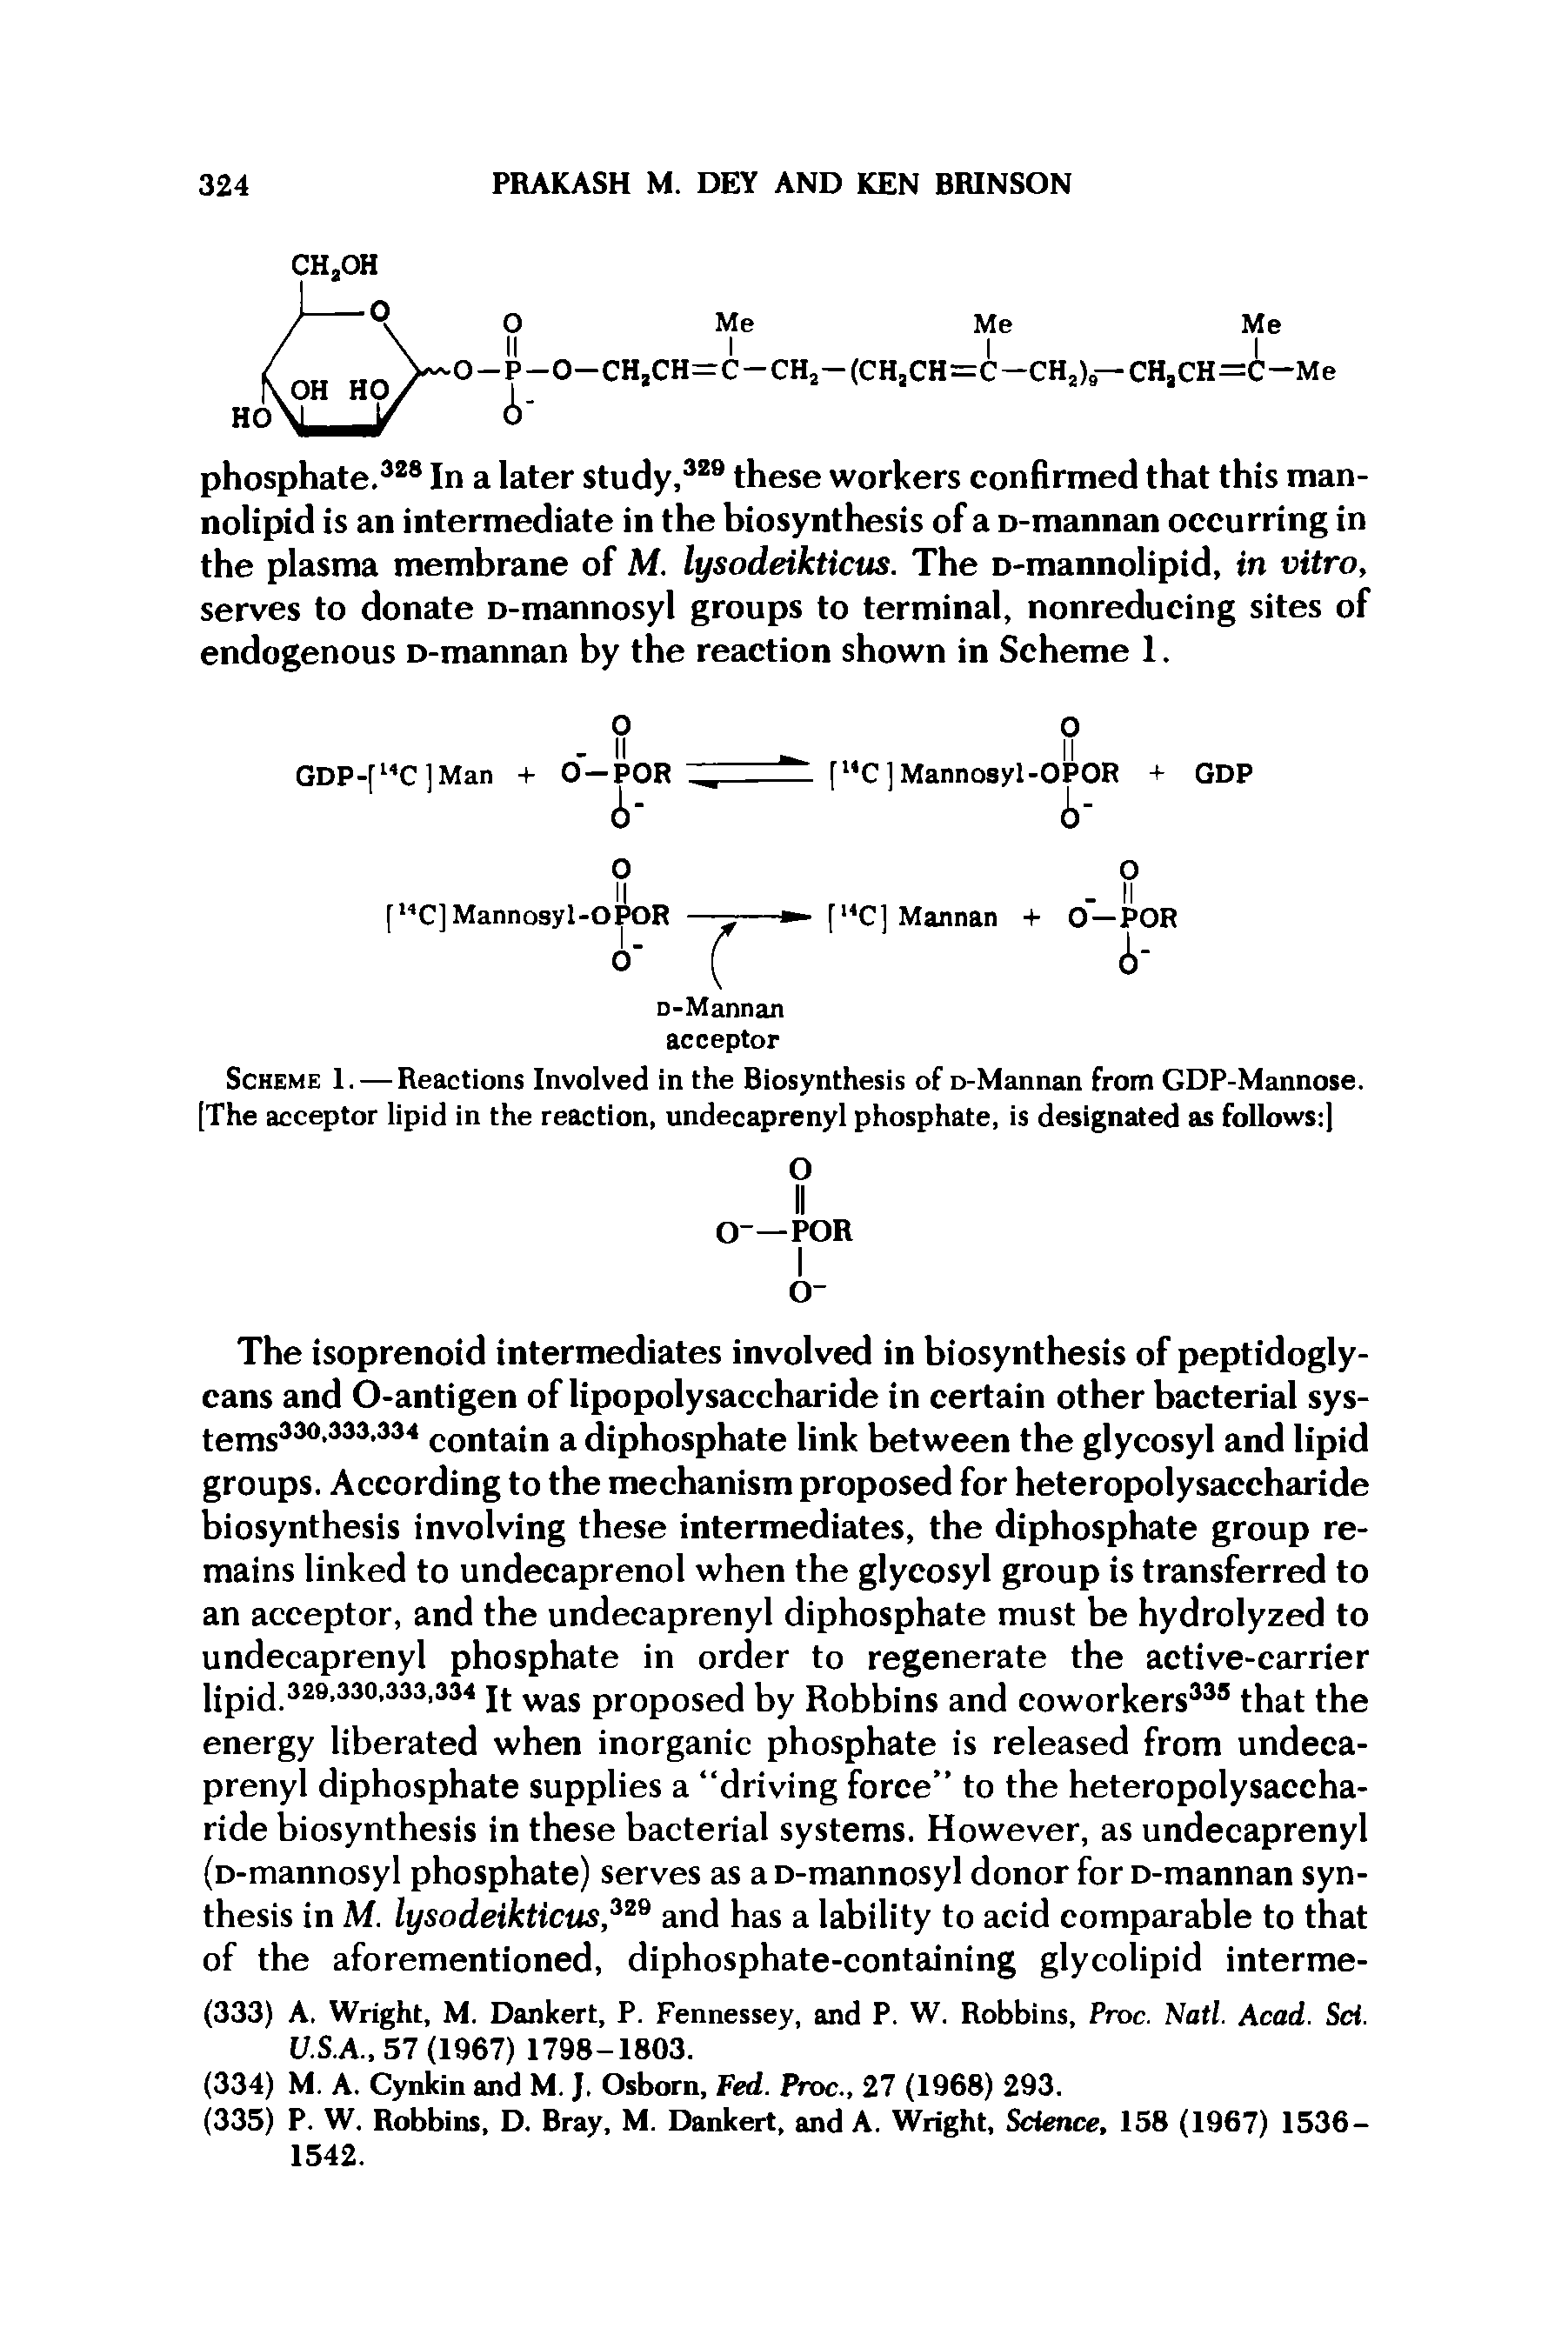 Scheme 1. — Reactions Involved in the Biosynthesis of D-Mannan from GDP-Mannose. [The acceptor lipid in the reaction, undecaprenyl phosphate, is designated as follows ]...